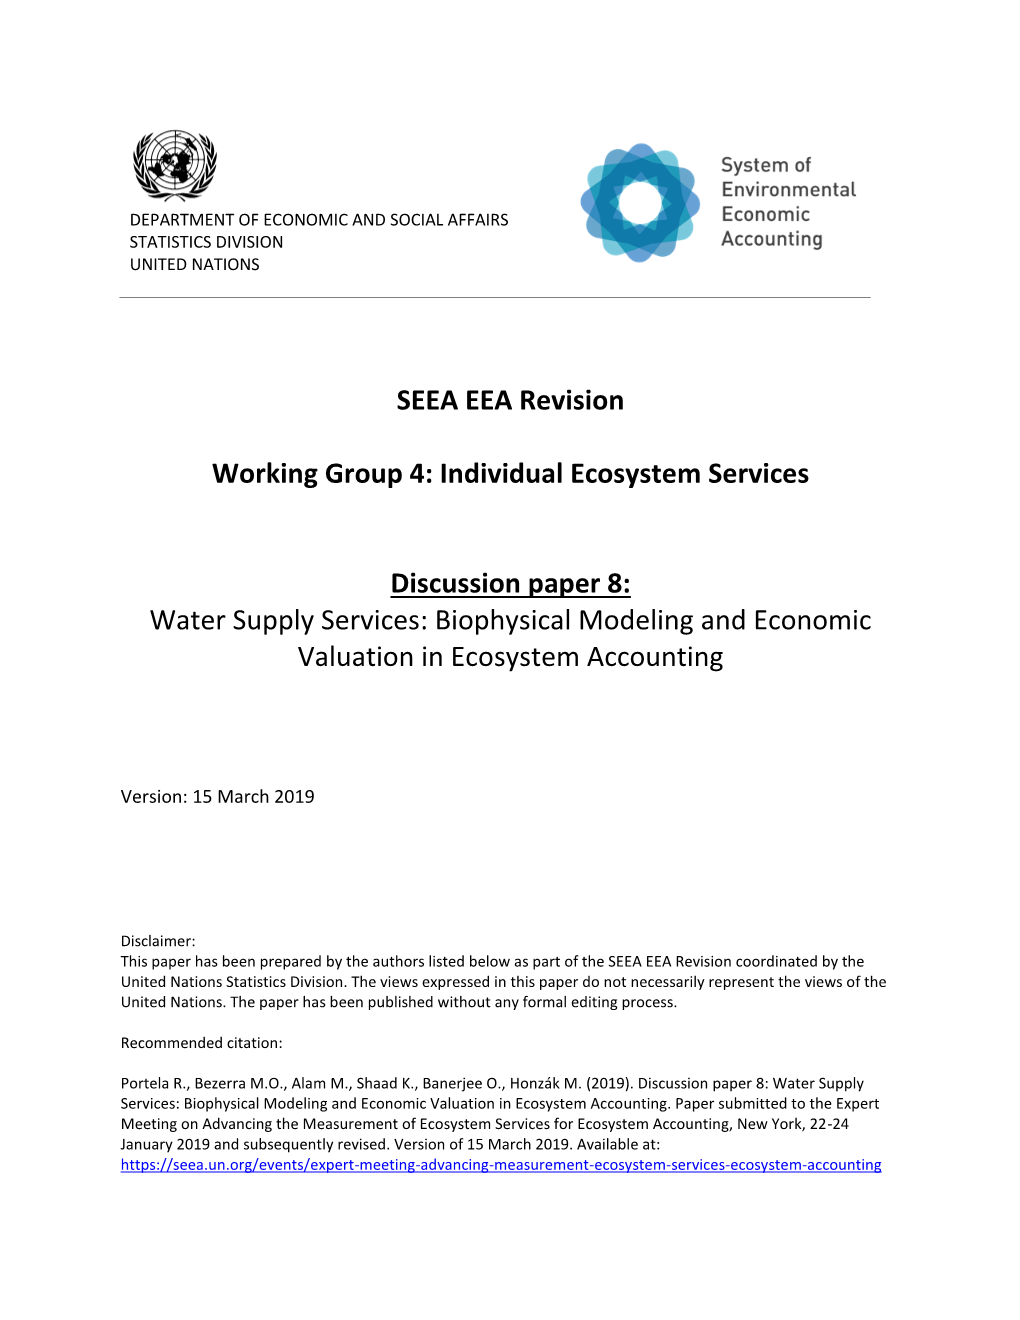 Water Supply Services: Biophysical Modeling and Economic Valuation in Ecosystem Accounting